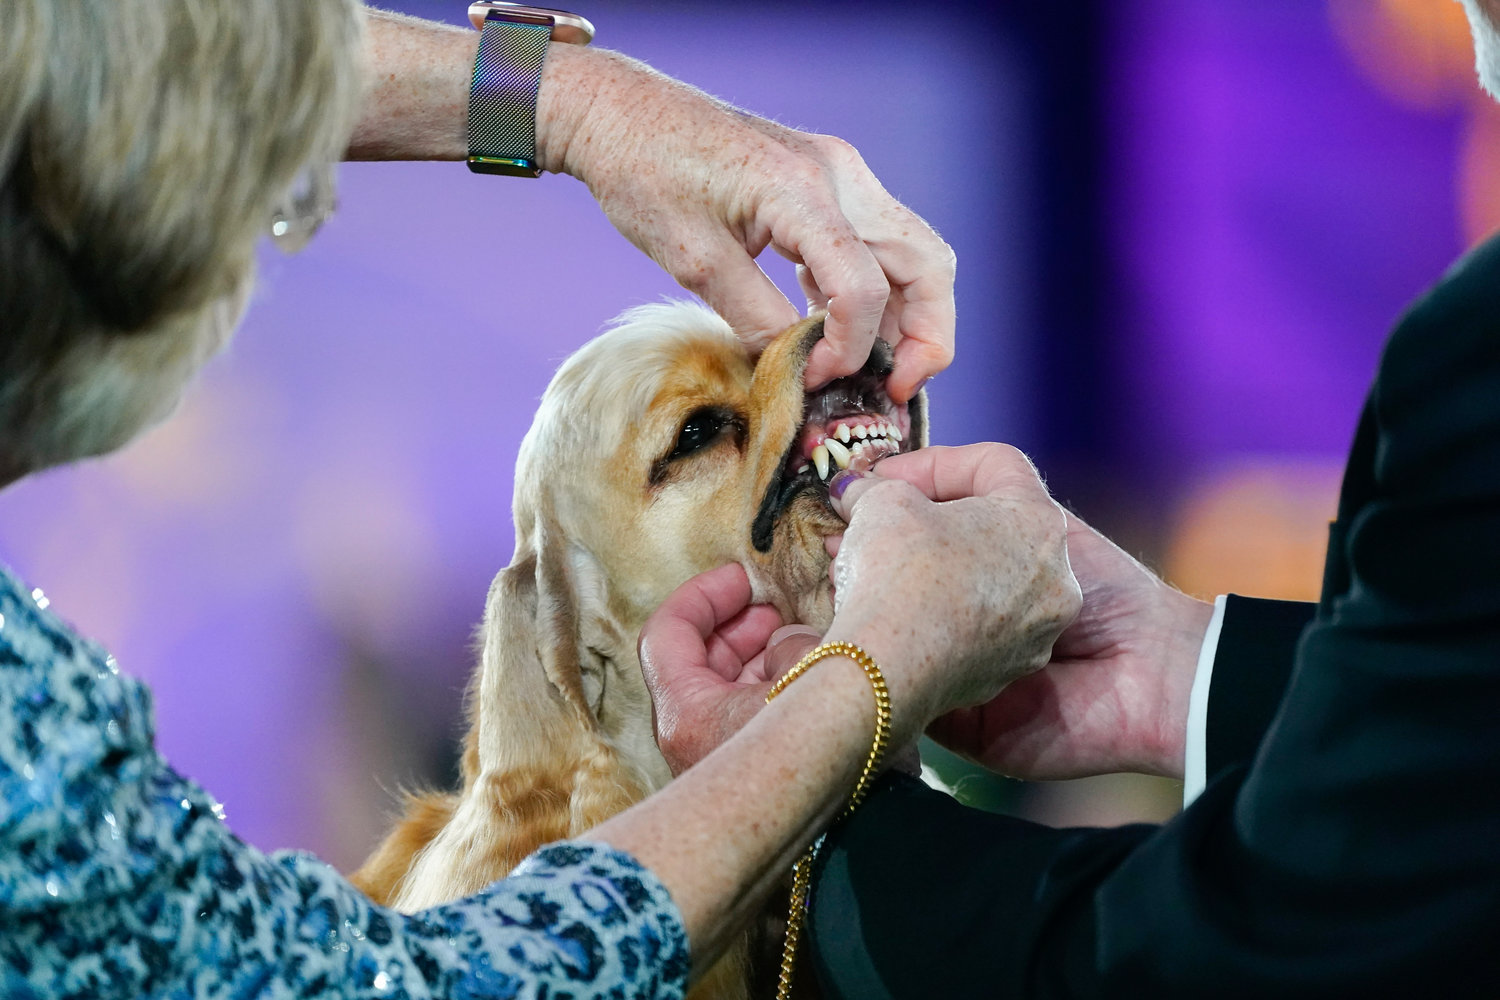 An A.S.C.O.B cocker spaniel competes in the sporting group at the 146th Westminster Kennel Club Dog Show Wednesday, June 22, 2022, in Tarrytown, N.Y. Belle, an English Setter, won the group. (AP Photo/Frank Franklin II)